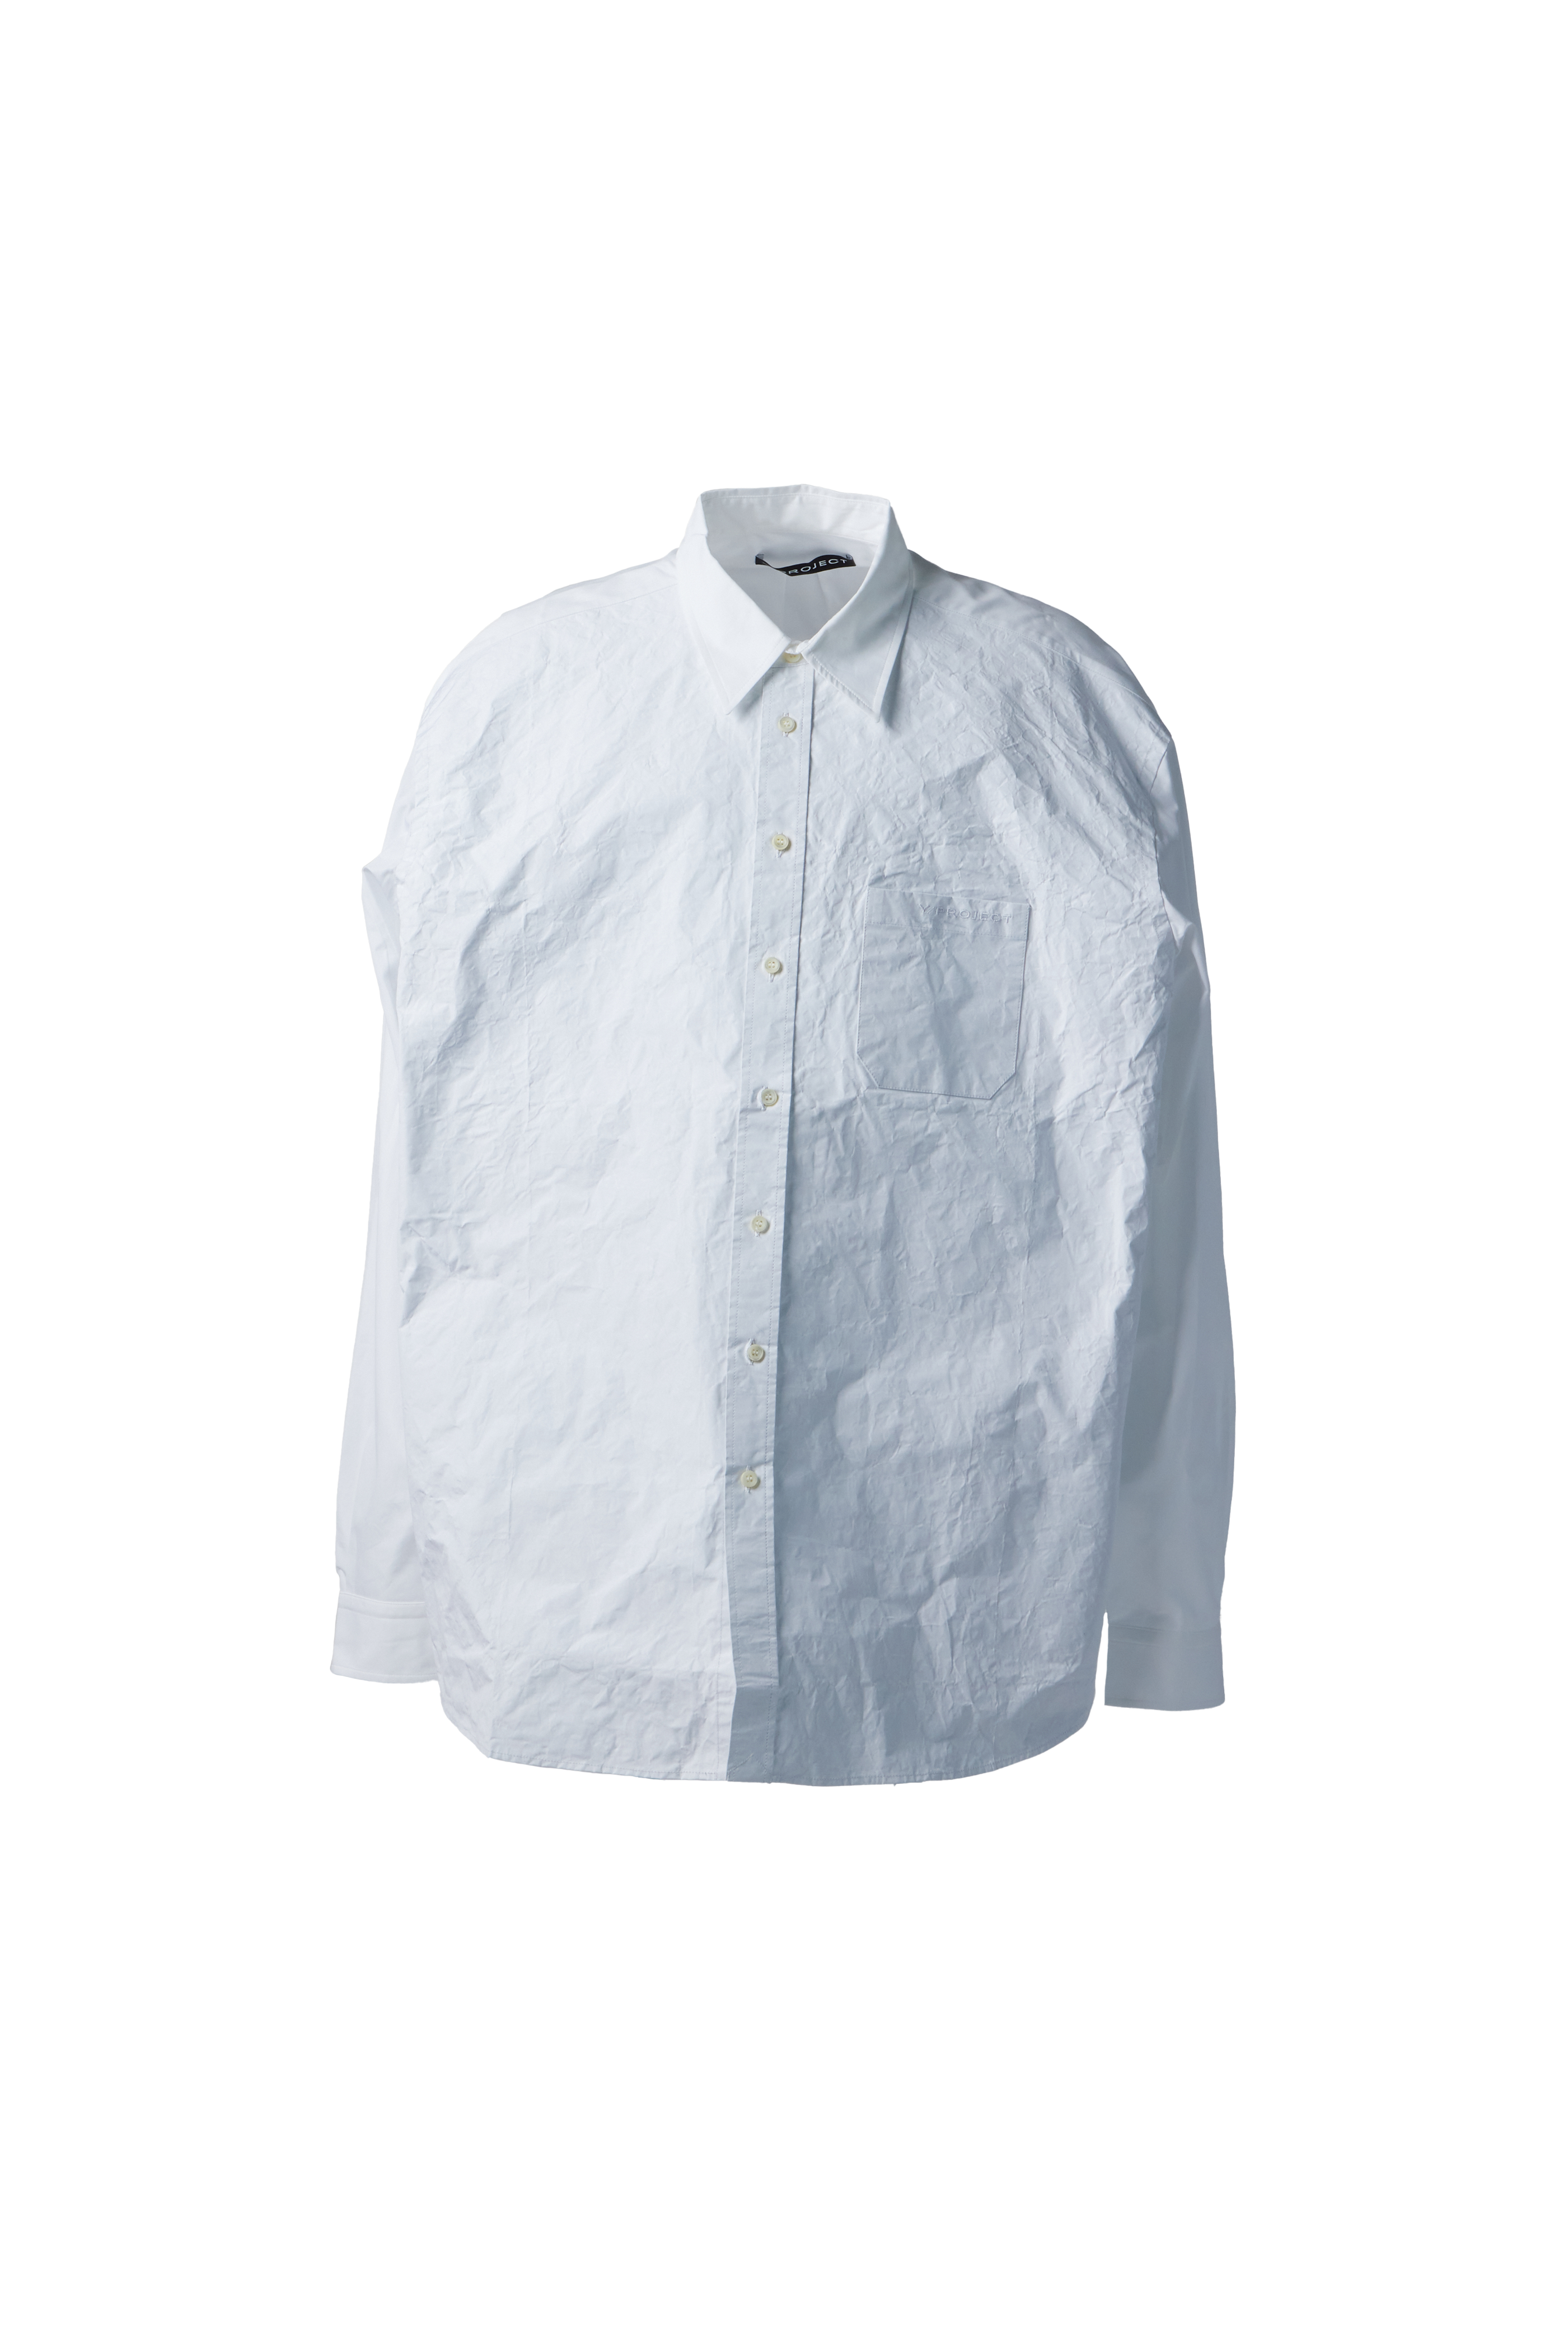 Y/PROJECT - Scrunched Button Up Shirt product image